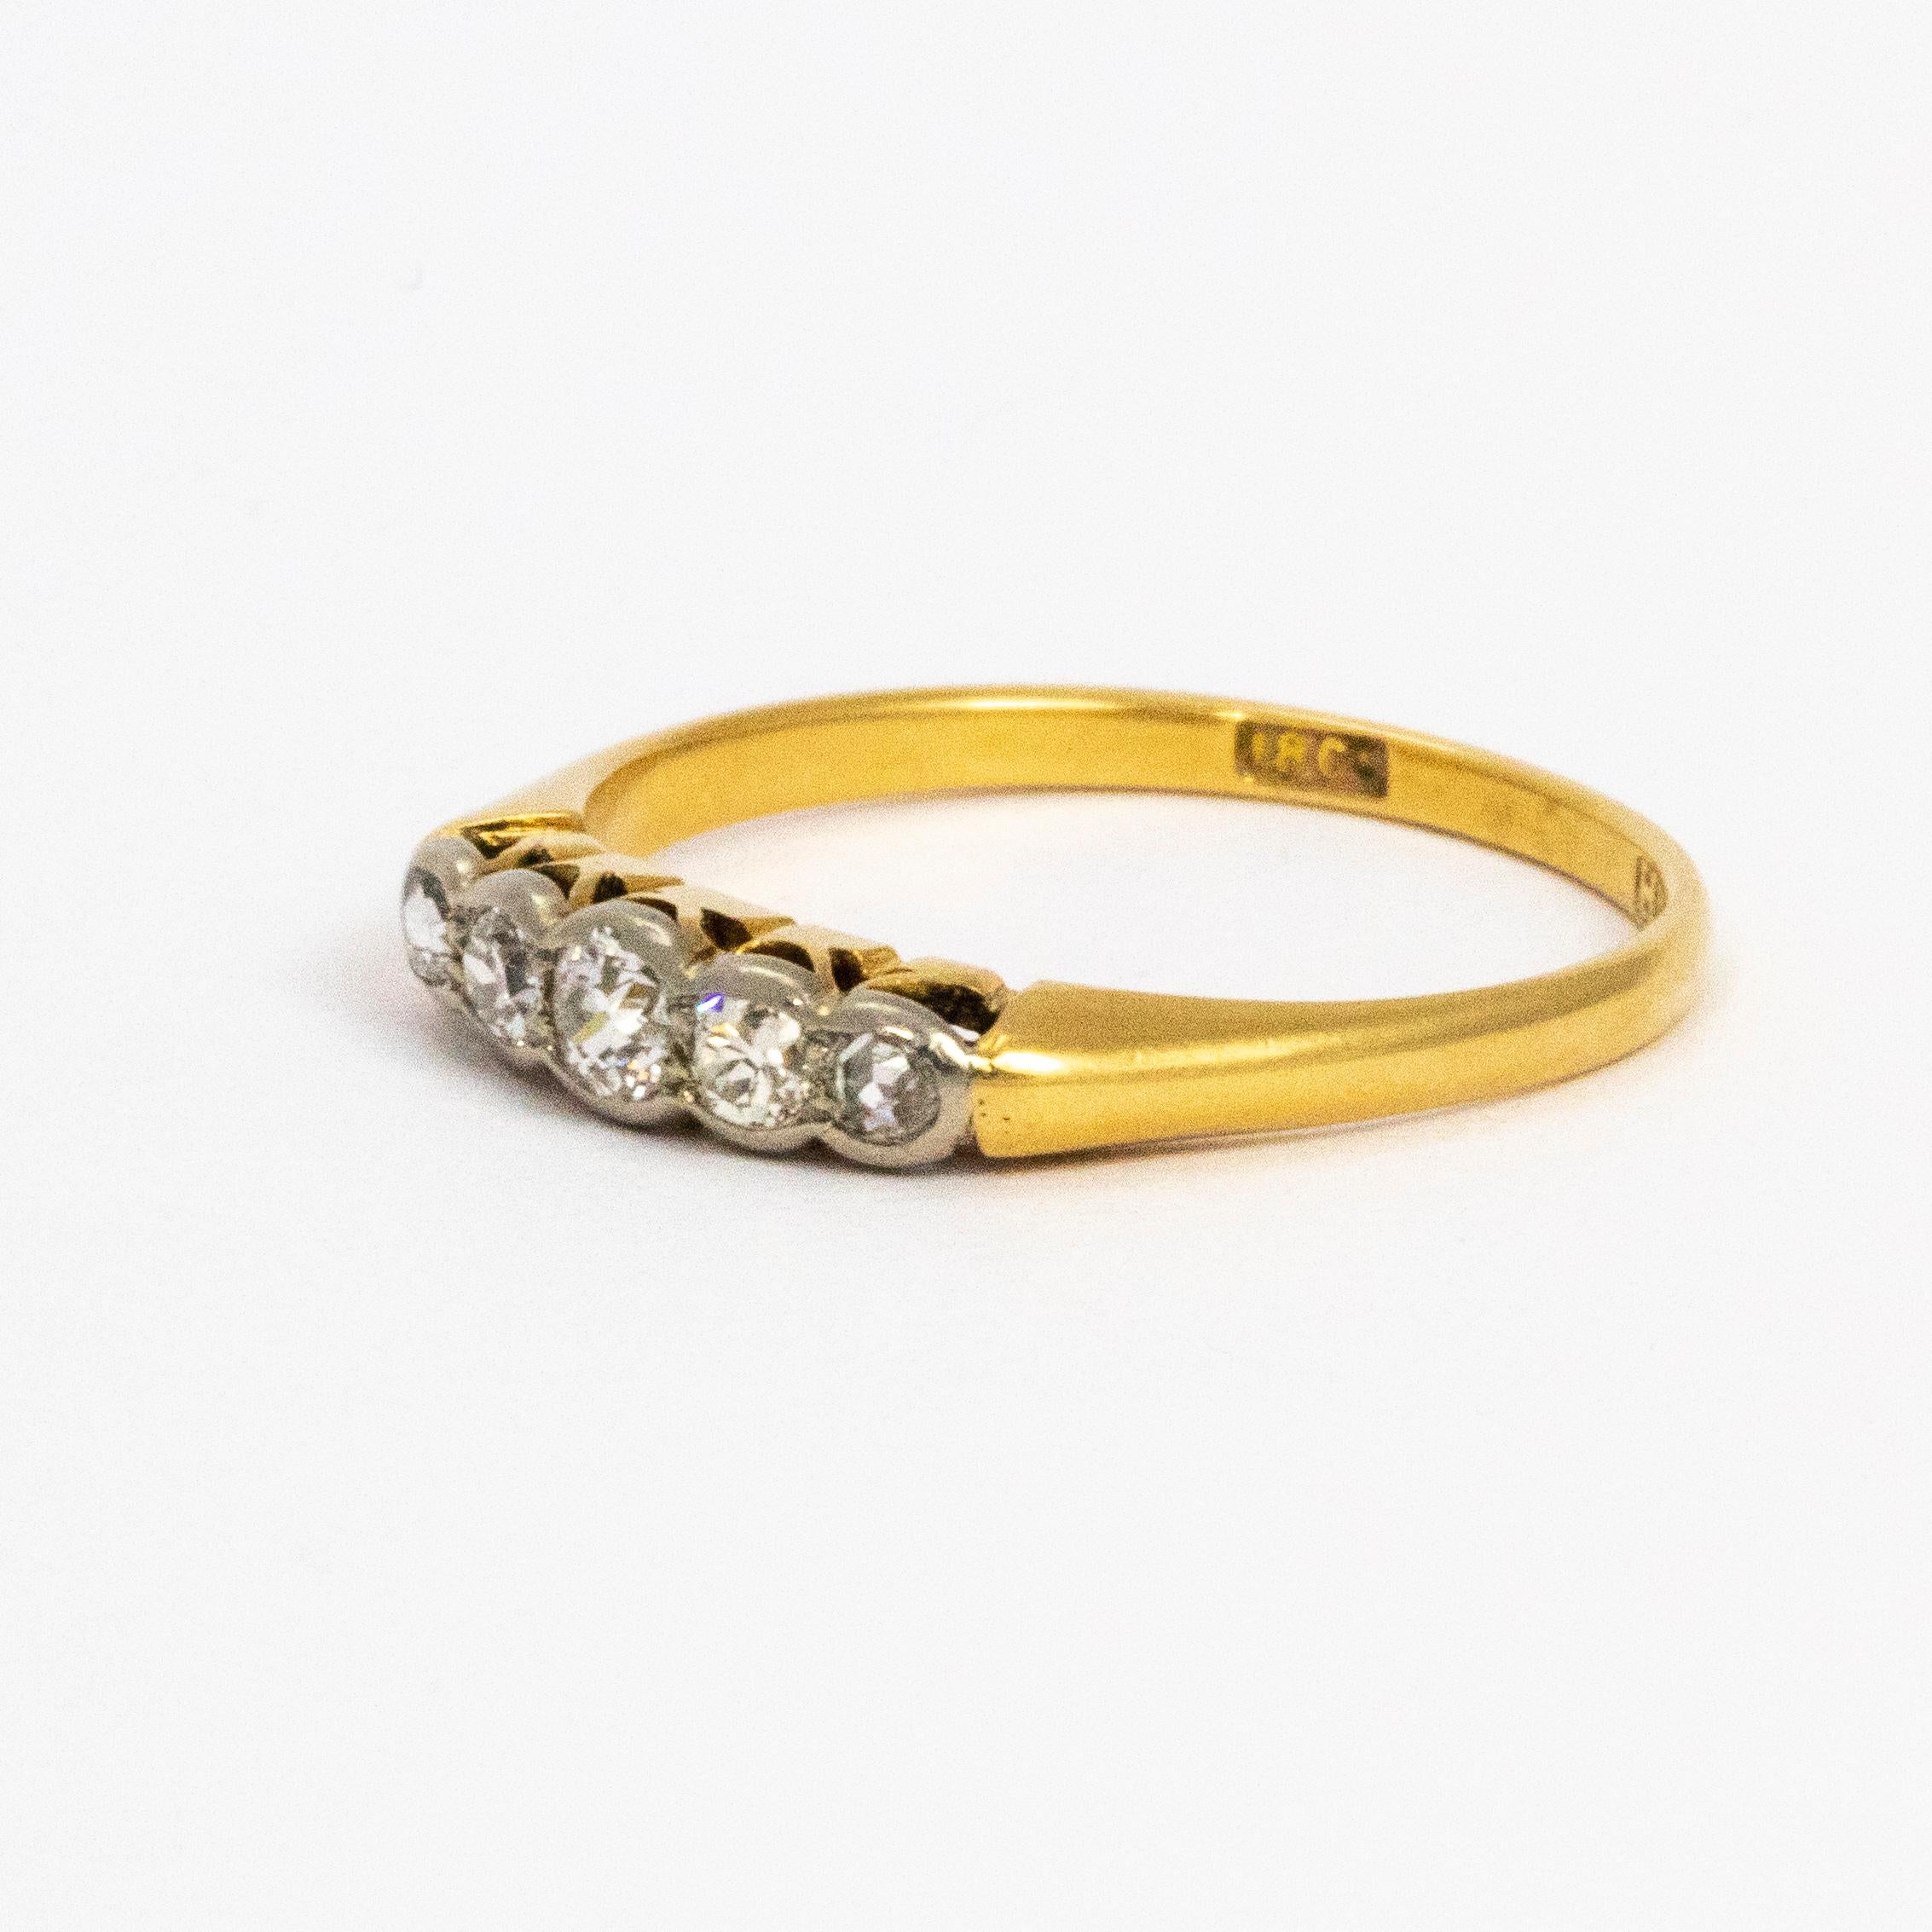 A delicate 18 karat gold band with 5 shimmering diamonds set in platinum.

Ring Size: M 1/2 or 6 1/2 